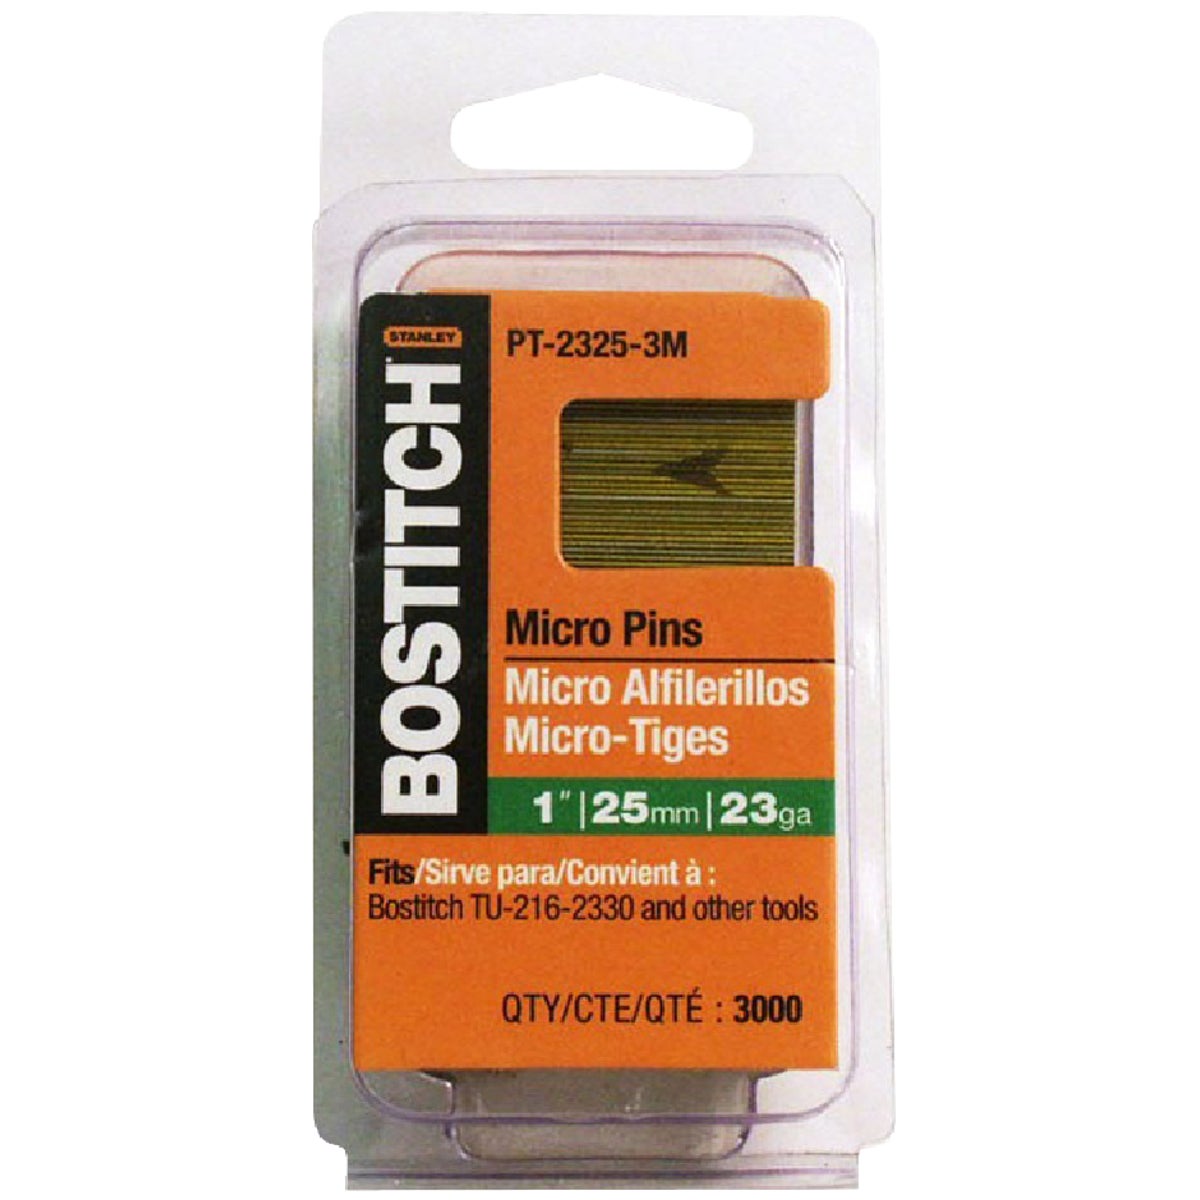 Bostitch 23-Gauge Coated Pin Nail, 3/4 In. (3000 Ct.)